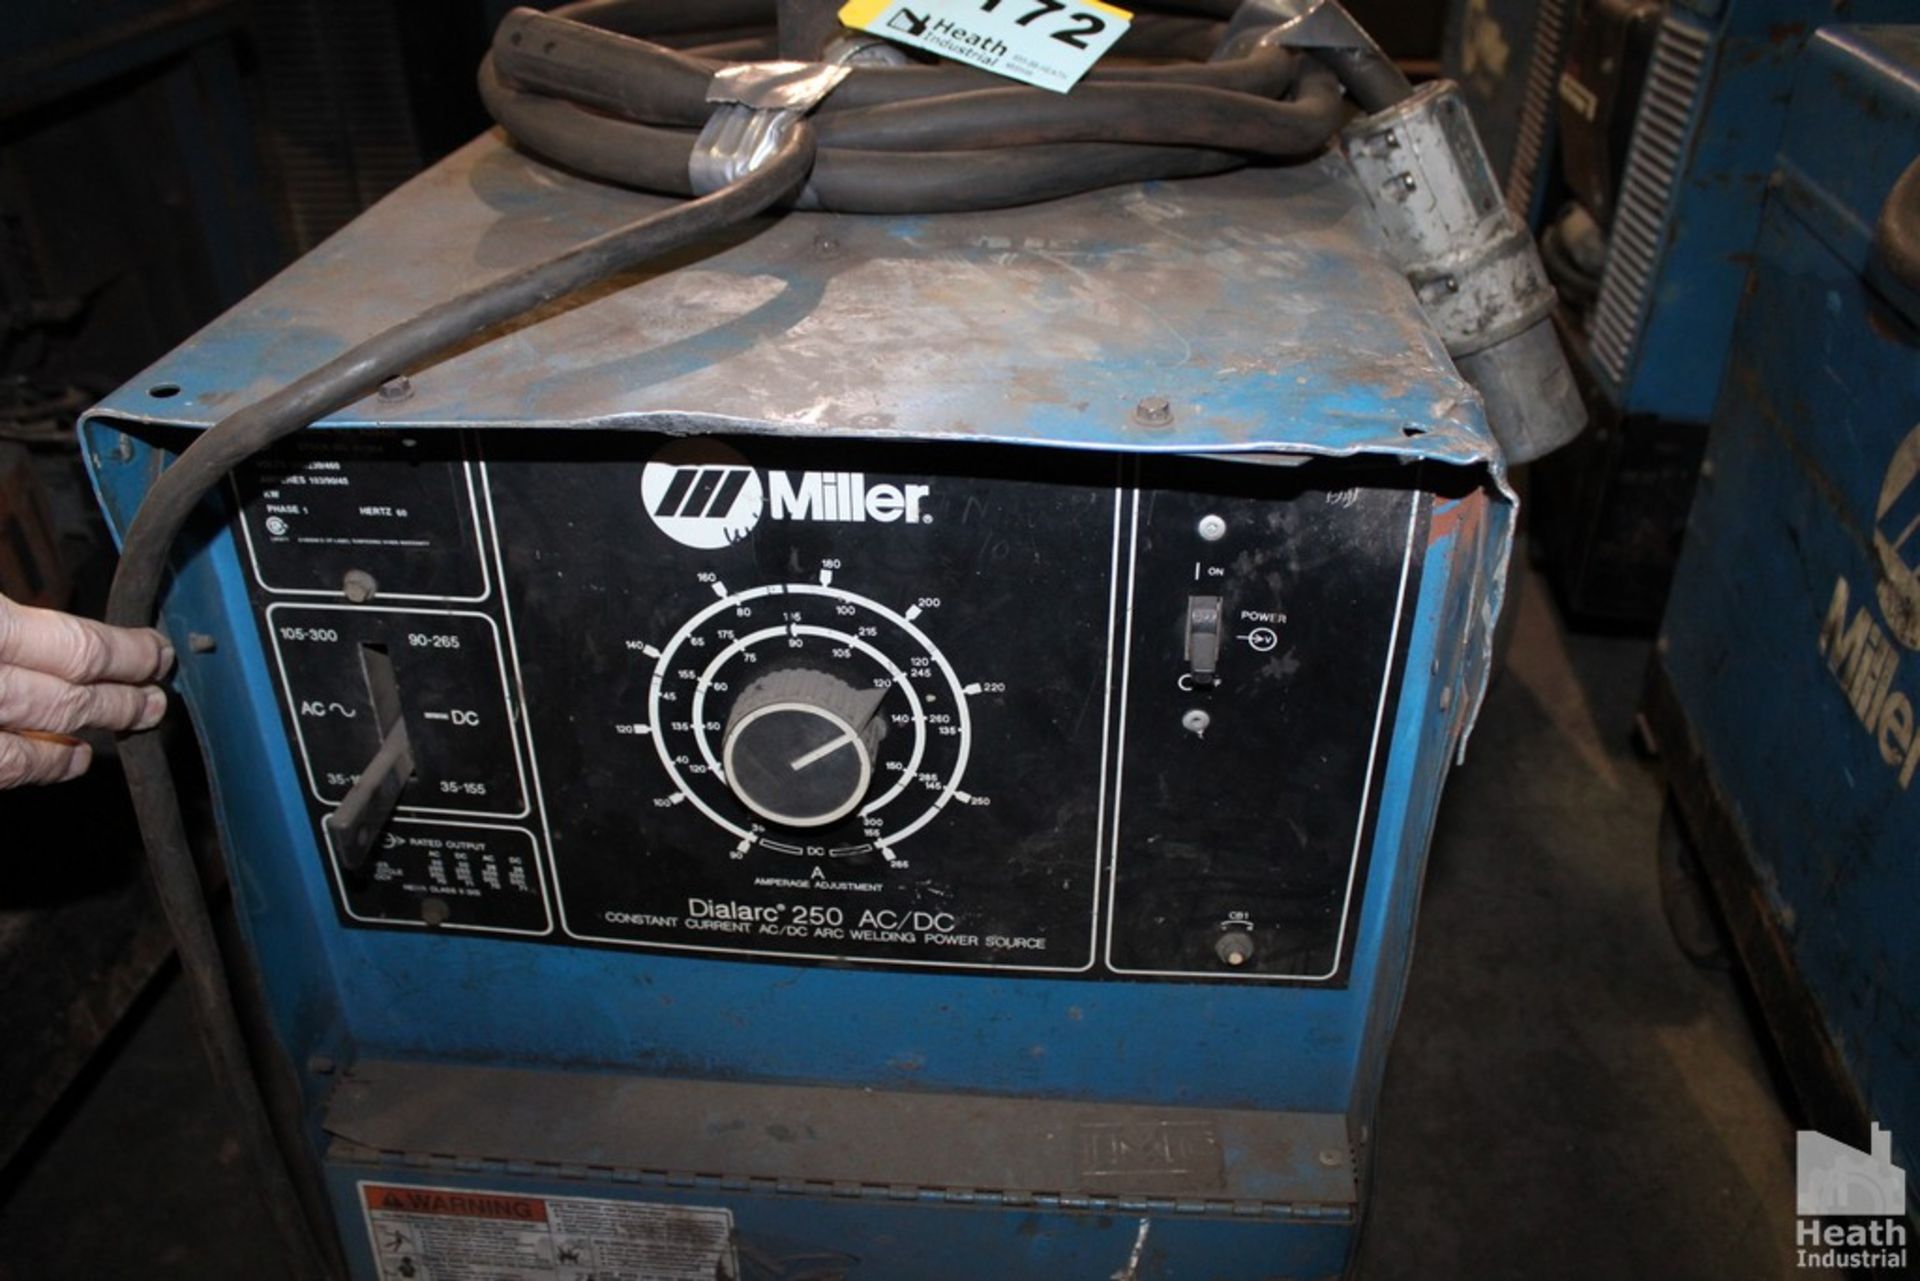 MILLER DIAL ARC 250 AC/DC CONSTANT CURRENT AC/DC ARC WELDING POWER SOURCE WITH CART, S/N KD542812 - Image 2 of 3